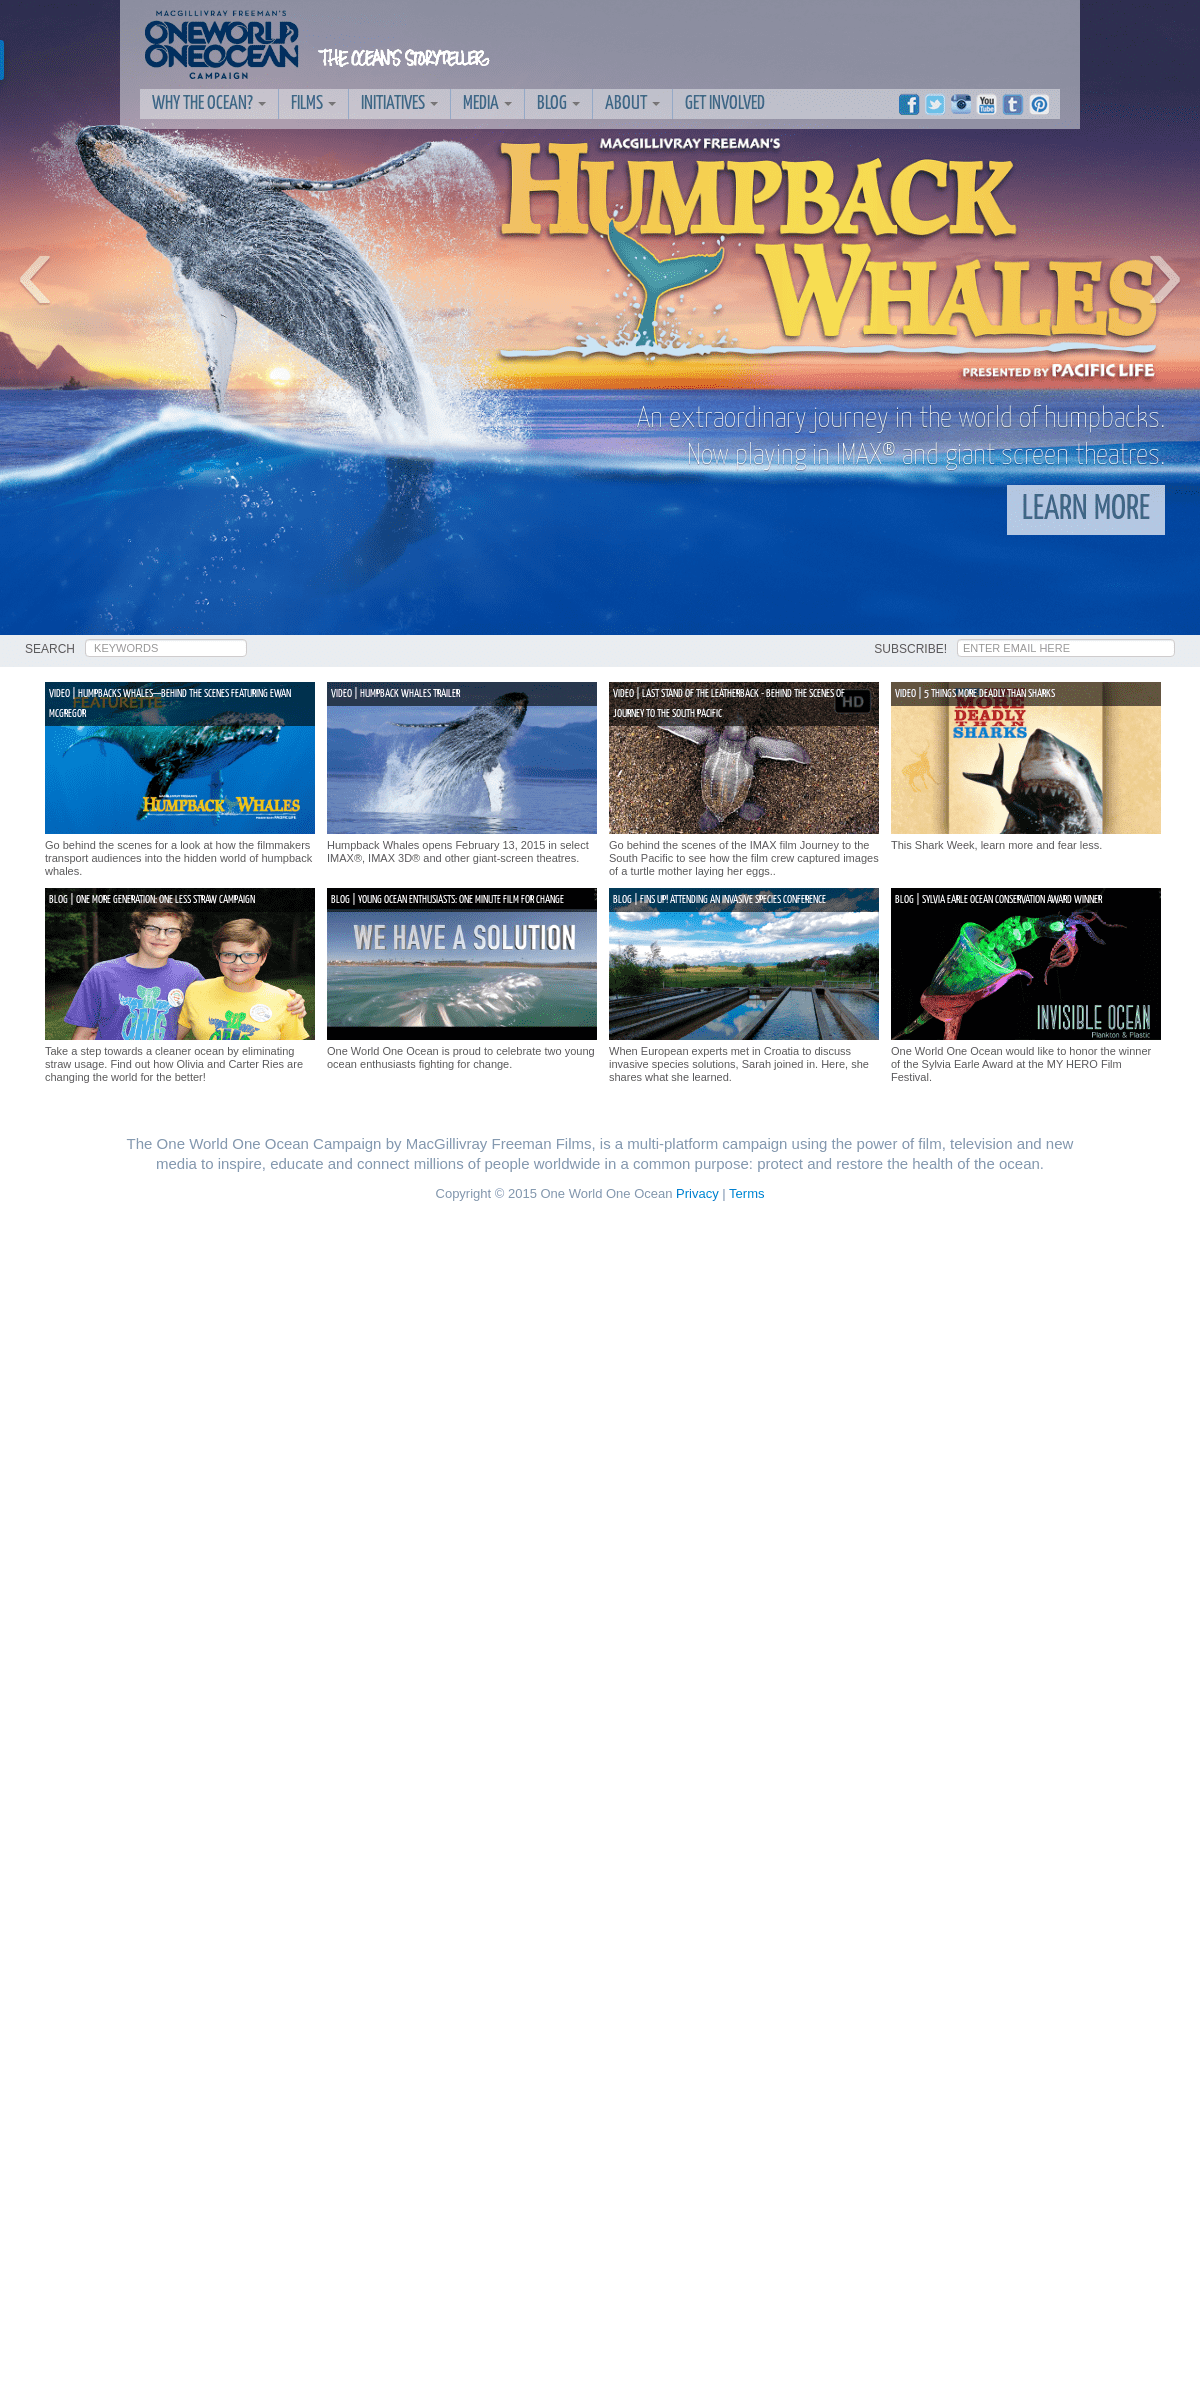 A complete backup of oneworldoneocean.com